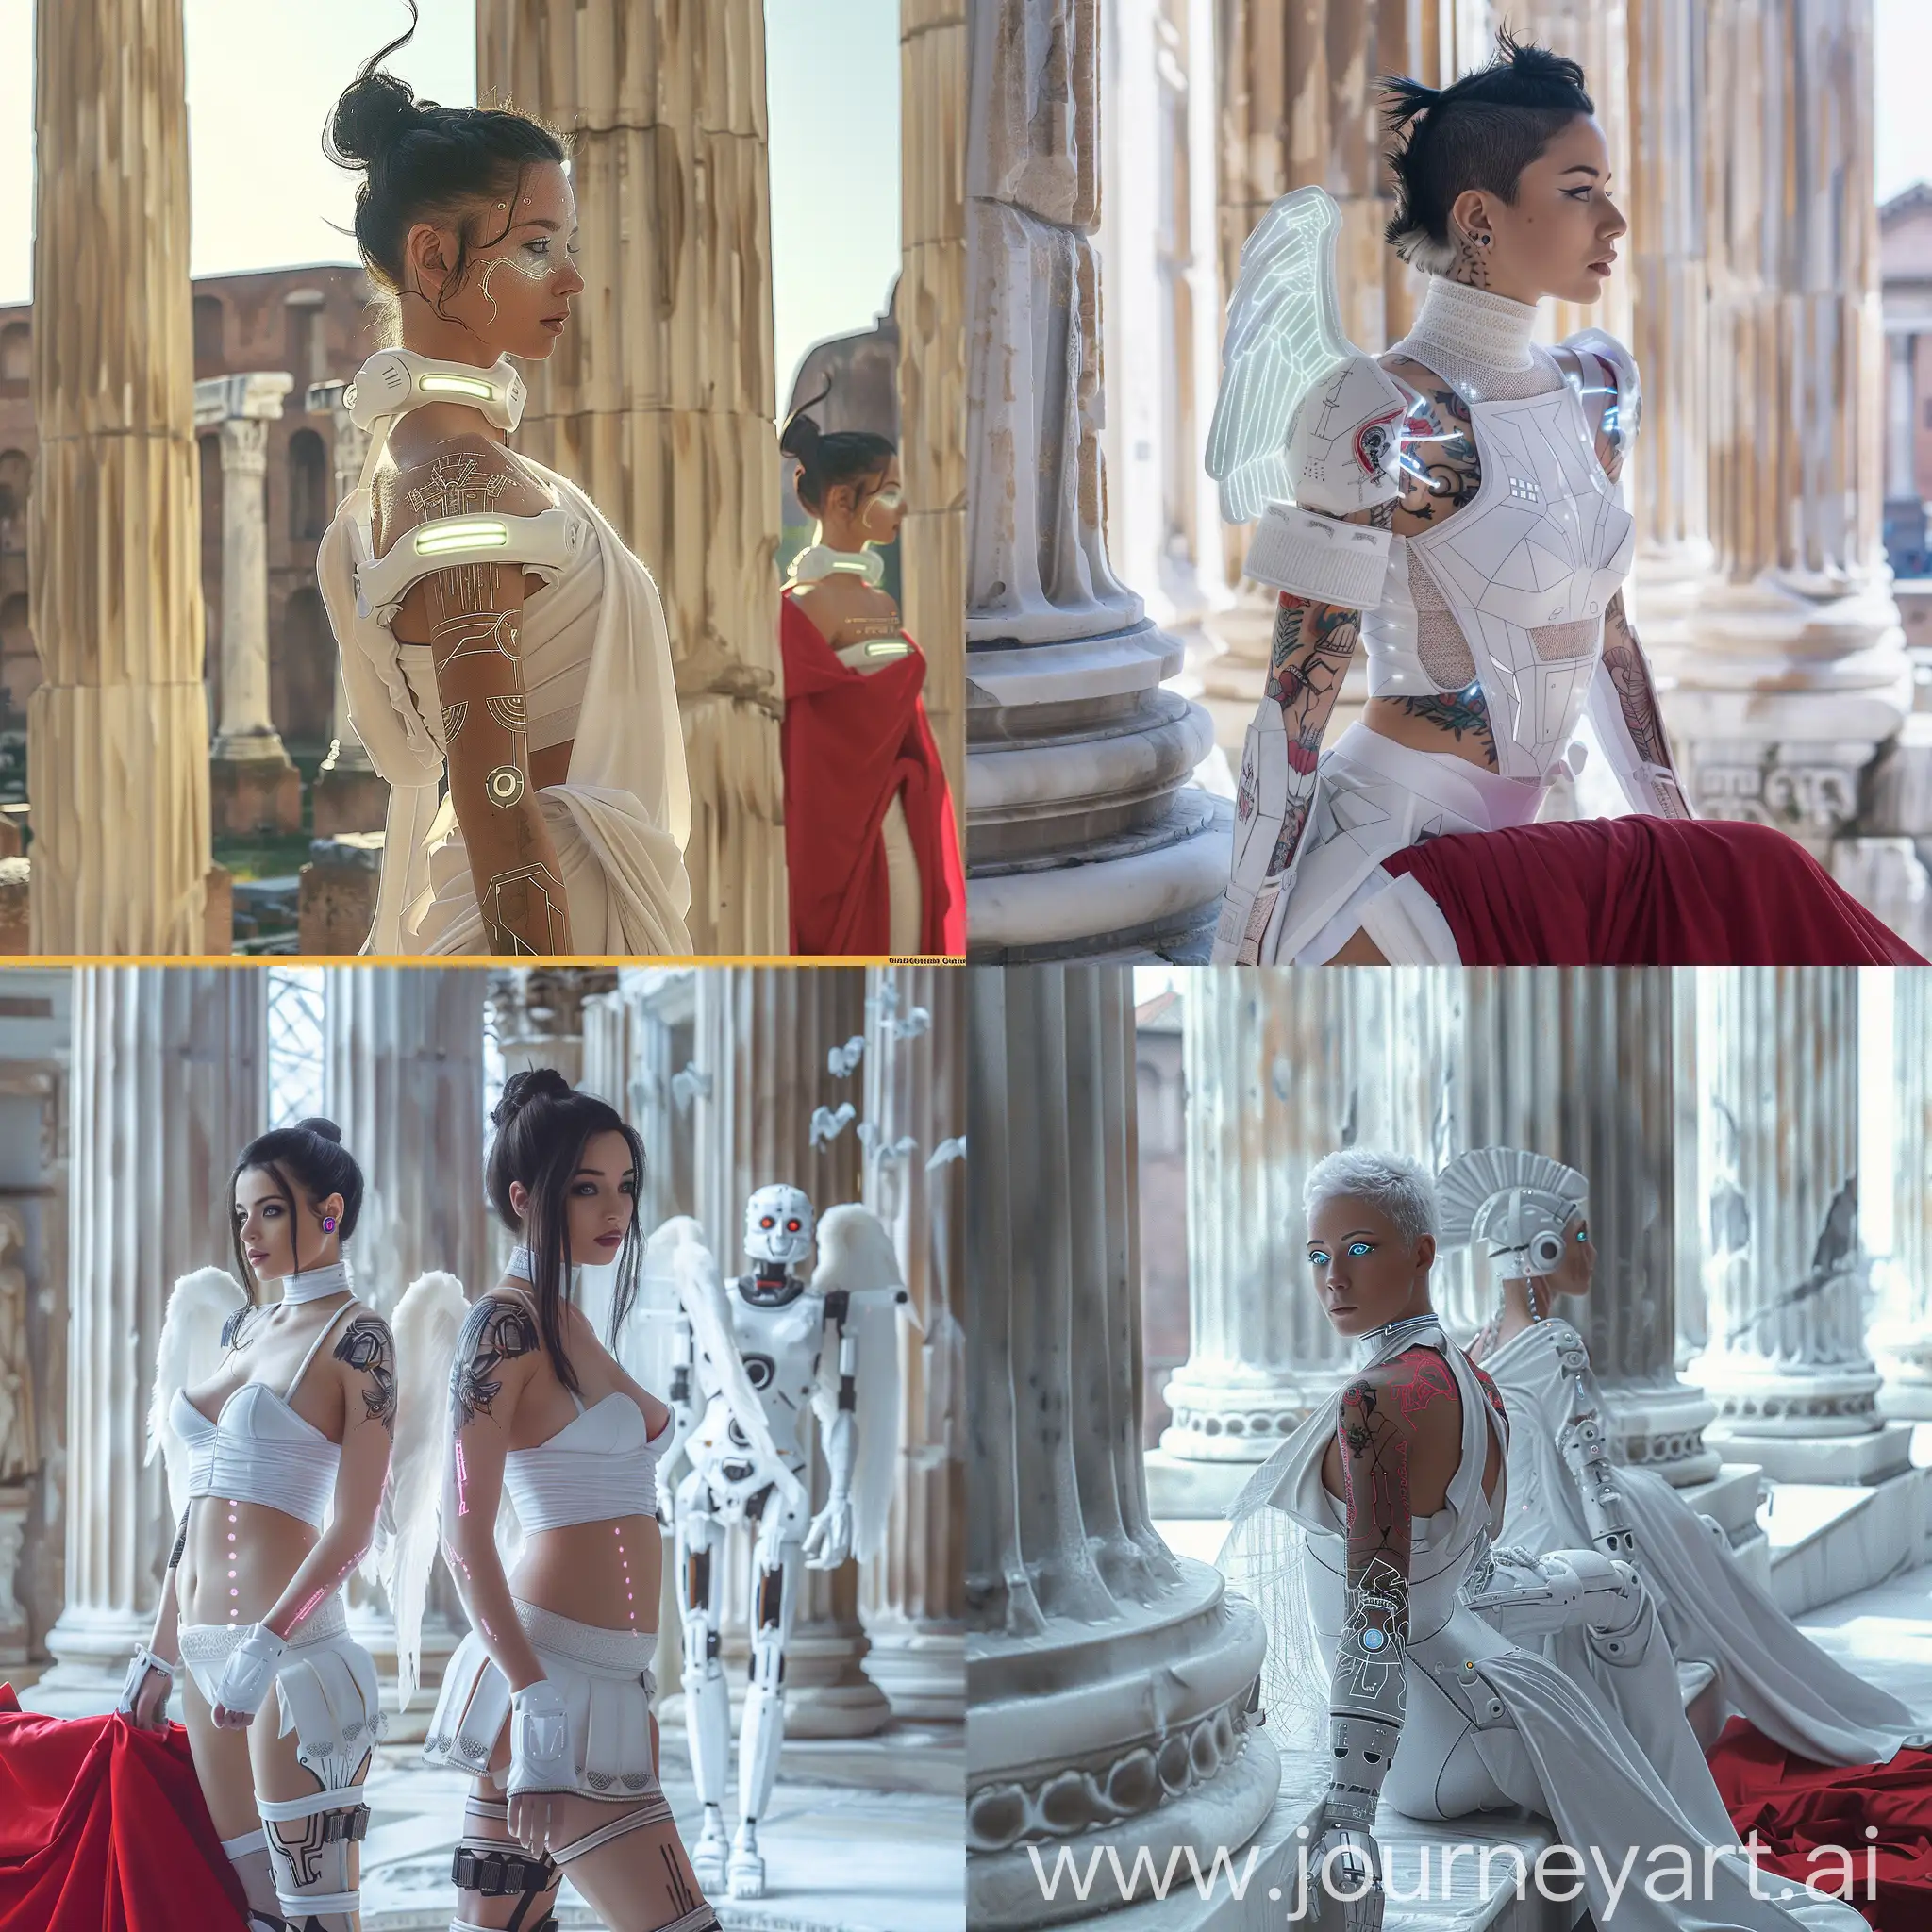 apocalypsecore, gladiator, ancient rome, roman forum, columns, beautiful women with luminescent tattoos wearing white, robot angels, white marble, red fabrics